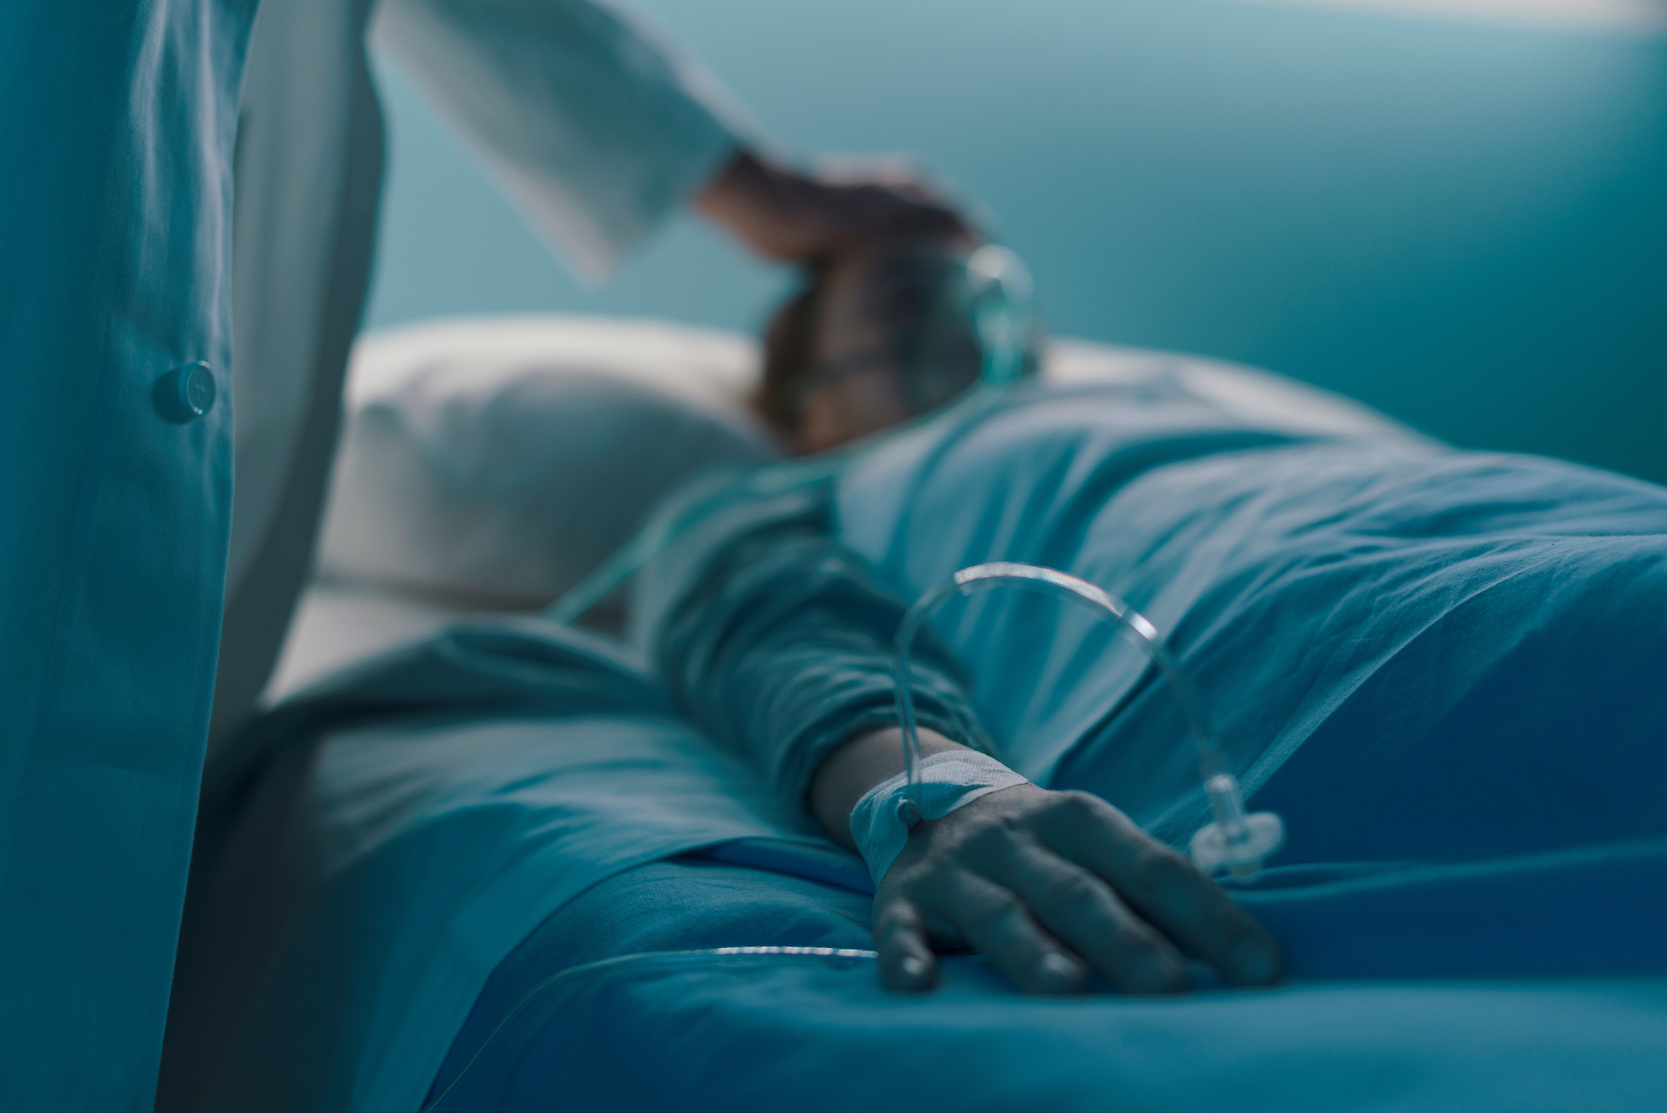 Hospitalized patient lying in a hospital bed